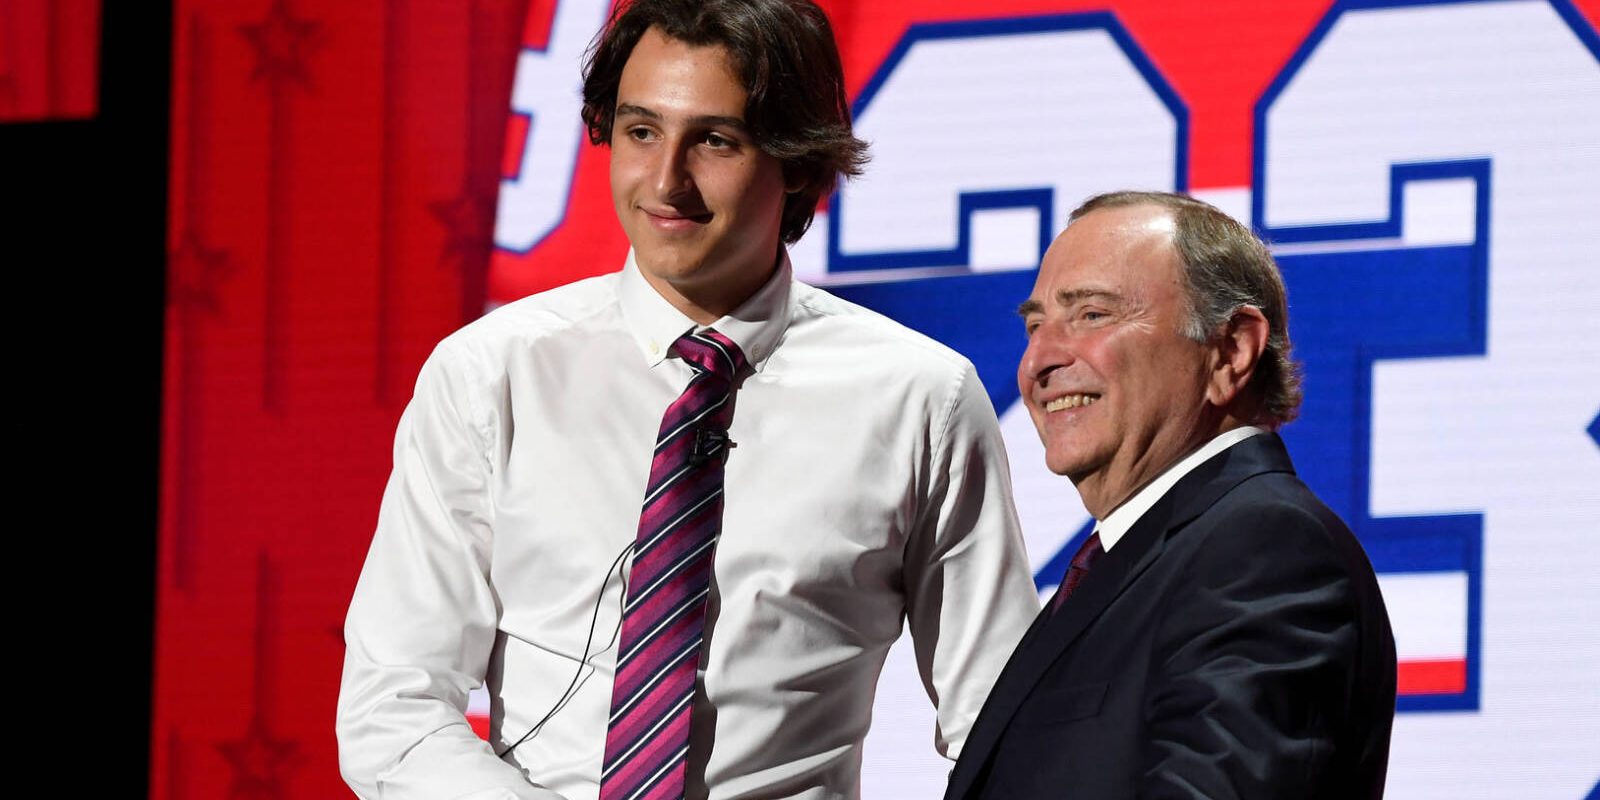 Jun 28, 2023; Nashville, Tennessee, USA; Montreal Canadians draft pick David Reinbacher shakes hands with NHL commissioner Gary Bettman after being selected with the fifth pick in round one of the 2023 NHL Draft at Bridgestone Arena. Mandatory Credit: Christopher Hanewinckel-USA TODAY Sports